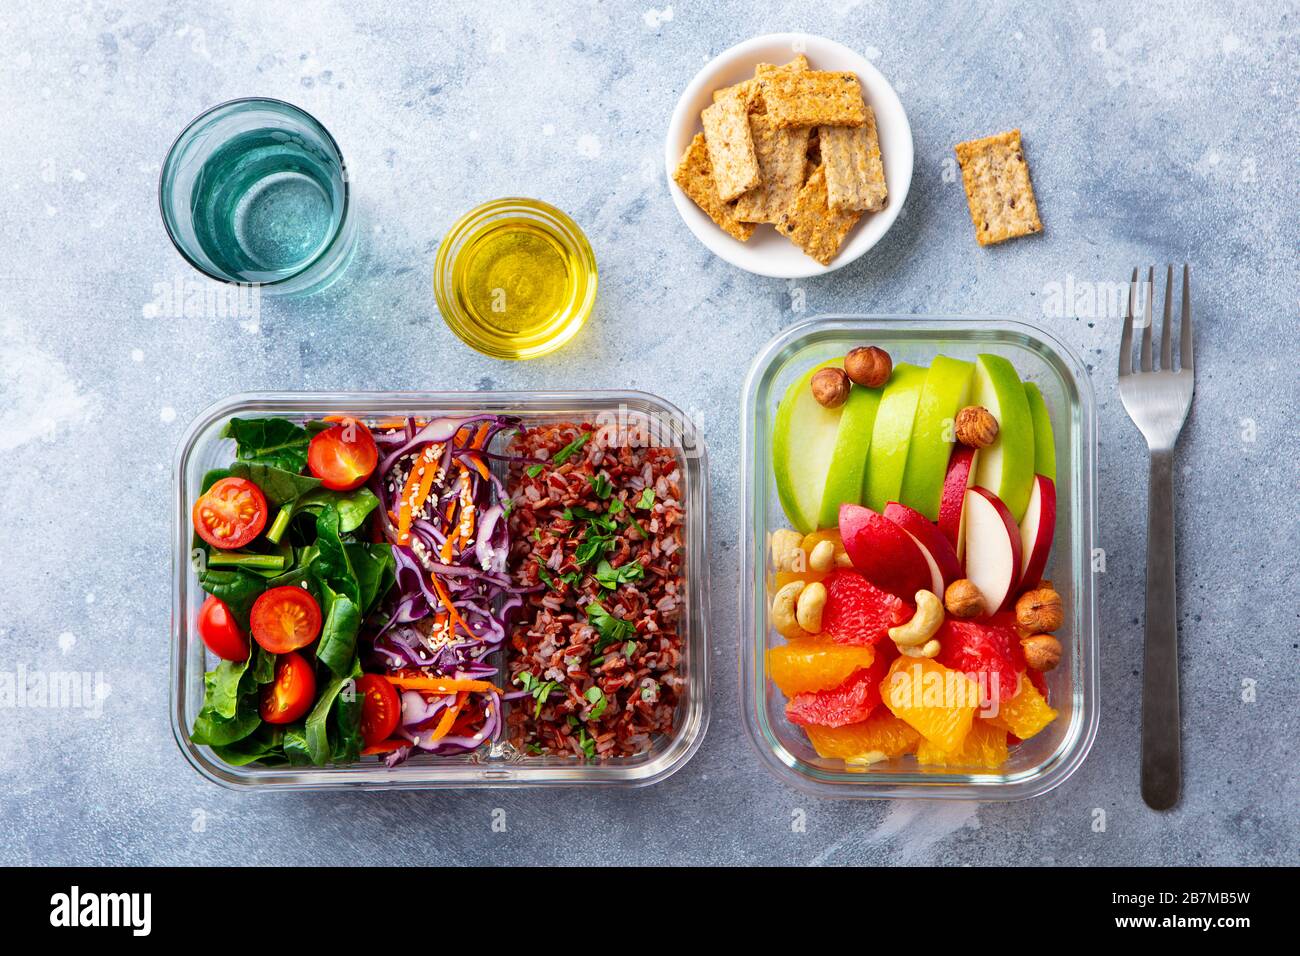 Lunch box with vegetables, brown rice and fruits salad. Healthy eating. Grey background. Top view. Stock Photo